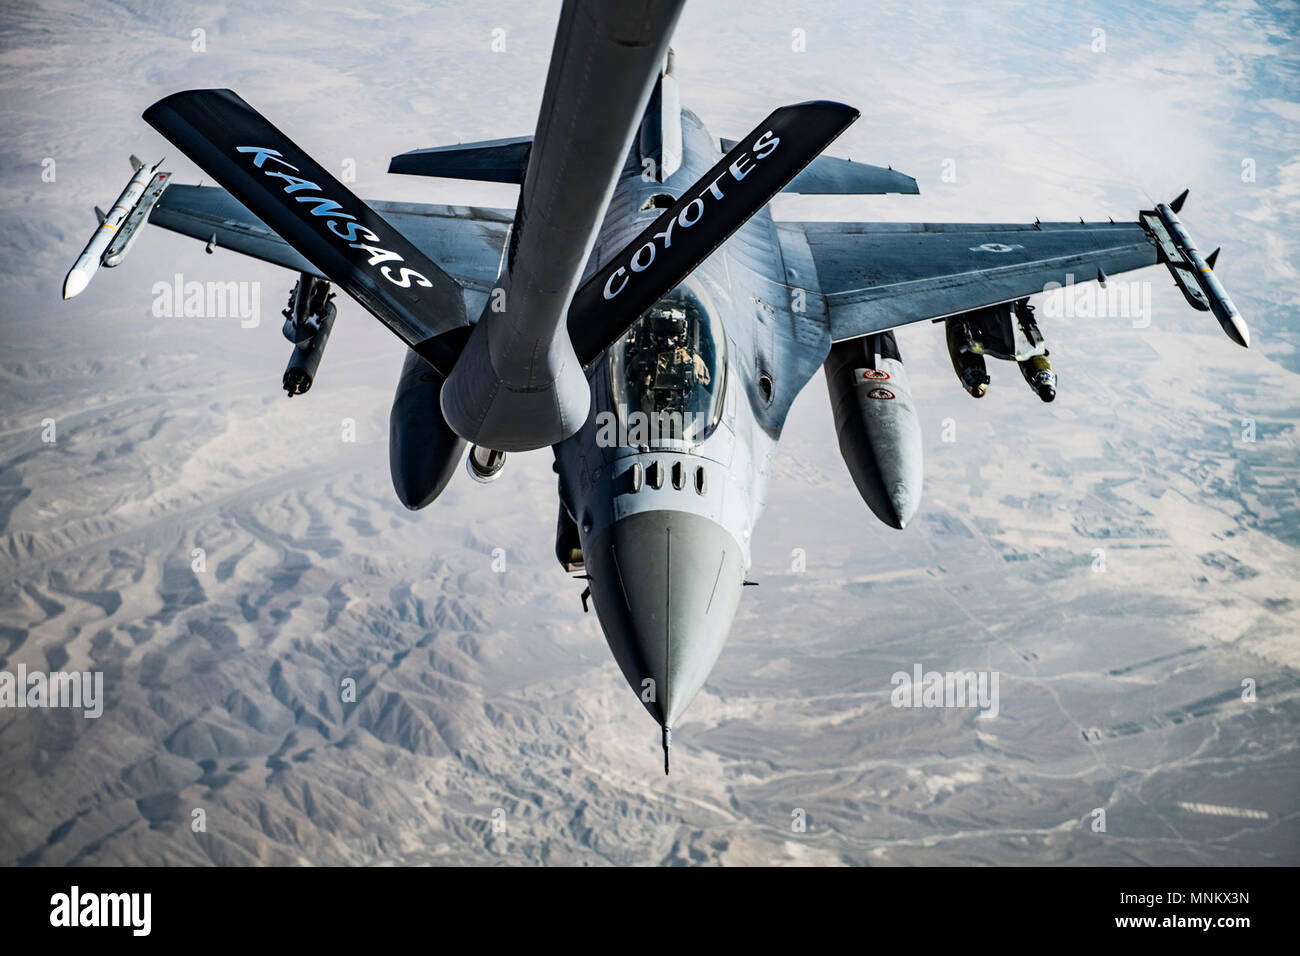 A U.S. Air Force F-16C Fighting Falcon pilot maneuvers in to position to conduct refueling operations with a KC-135 Stratotanker, assigned to the 340th Expeditionary Air Refueling Squadron Detatchment 1, over Afghanistan in support of Operation Freedom's Sentinel, March 11, 2018. The F-16's capabilities include air superiority, fighter escort, reconnaissance, aerial refueling, close air support, air defense suppression and precision strikes. Stock Photo